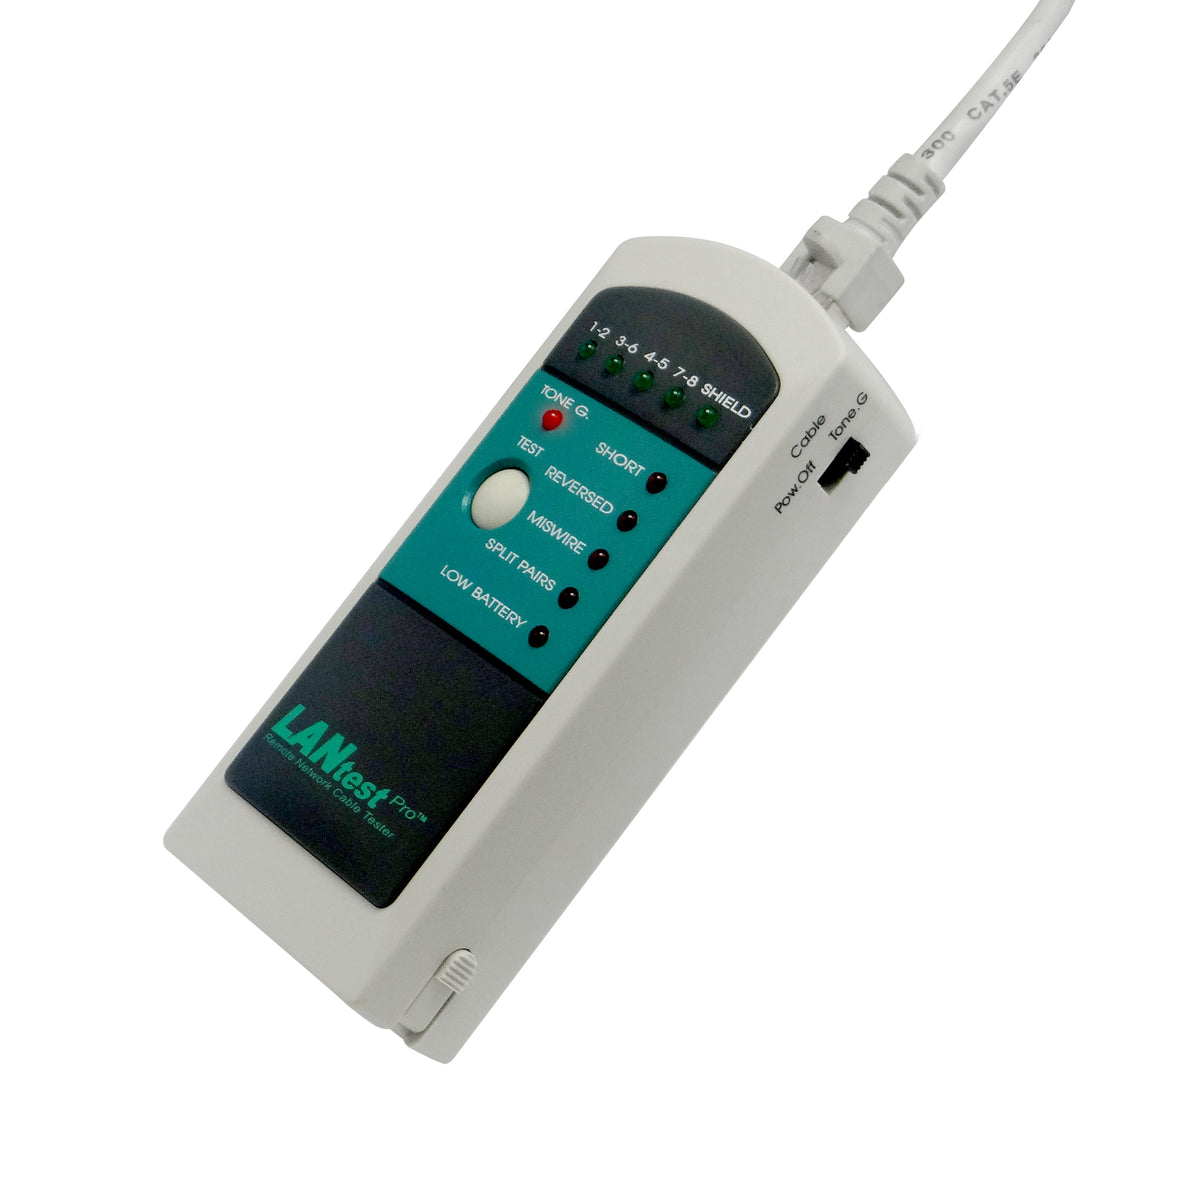 Network Cable Tester With Separate Power Over Ethernet Checker